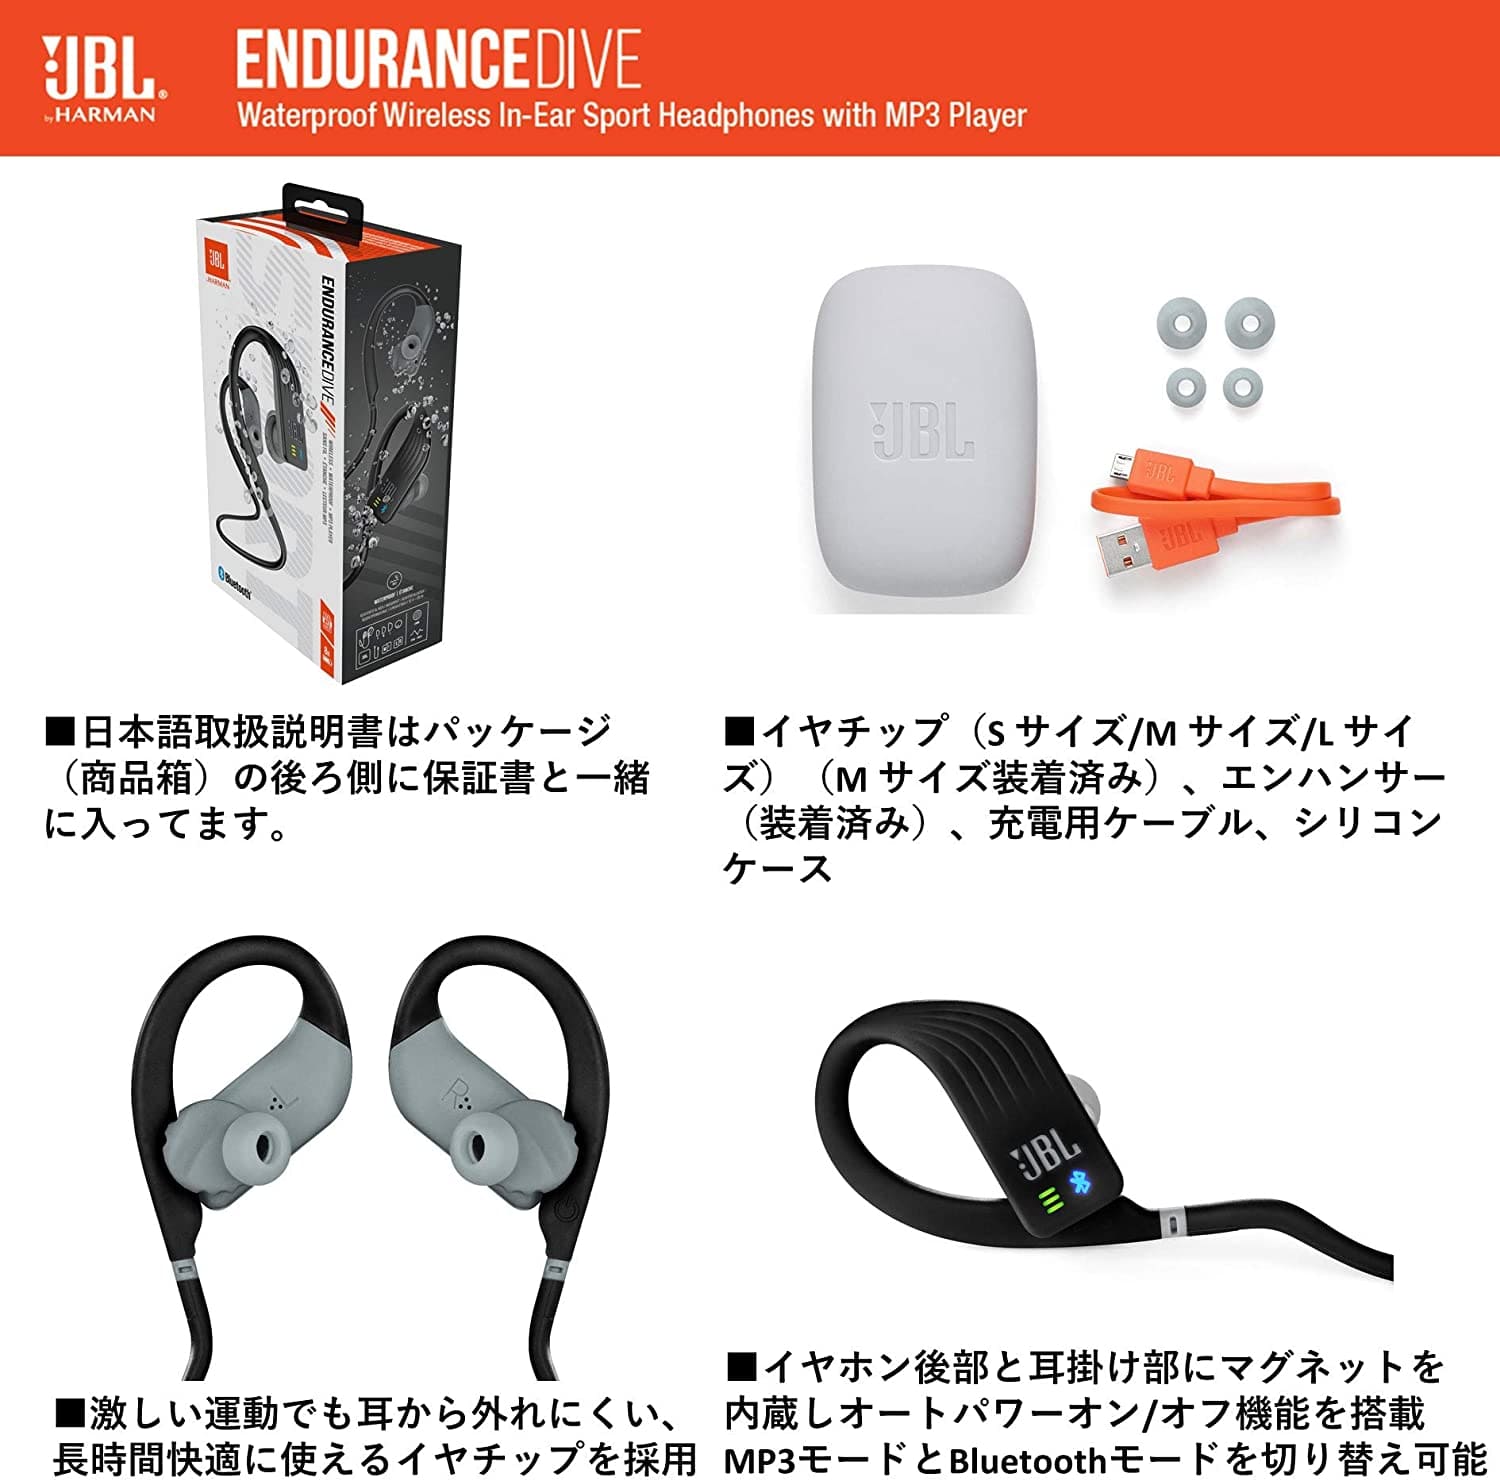 New]with the JBL ENDURANCE DIVE Bluetooth earphone IPX7 waterproofing MP3  player 1GB incorporation touch control function hands free call-response  Black JBLENDURDIVEBLK maker - BE FORWARD Store